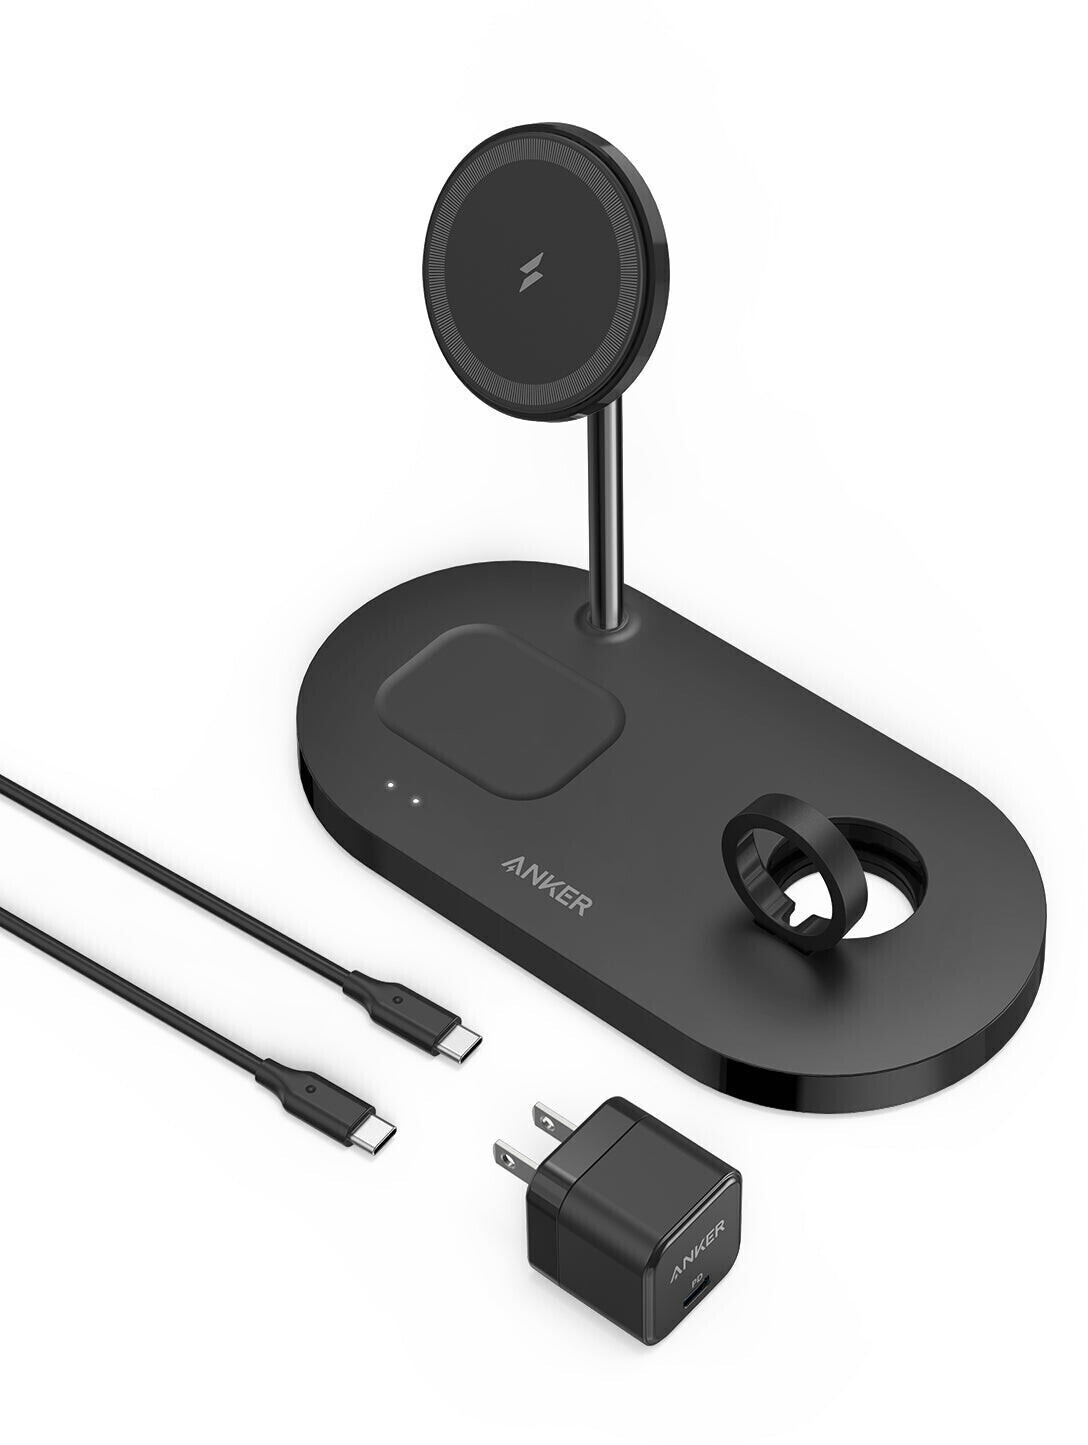 Anker 533 Magnetic Wireless Charger (3-in-1 Stand) ab 69,99 €